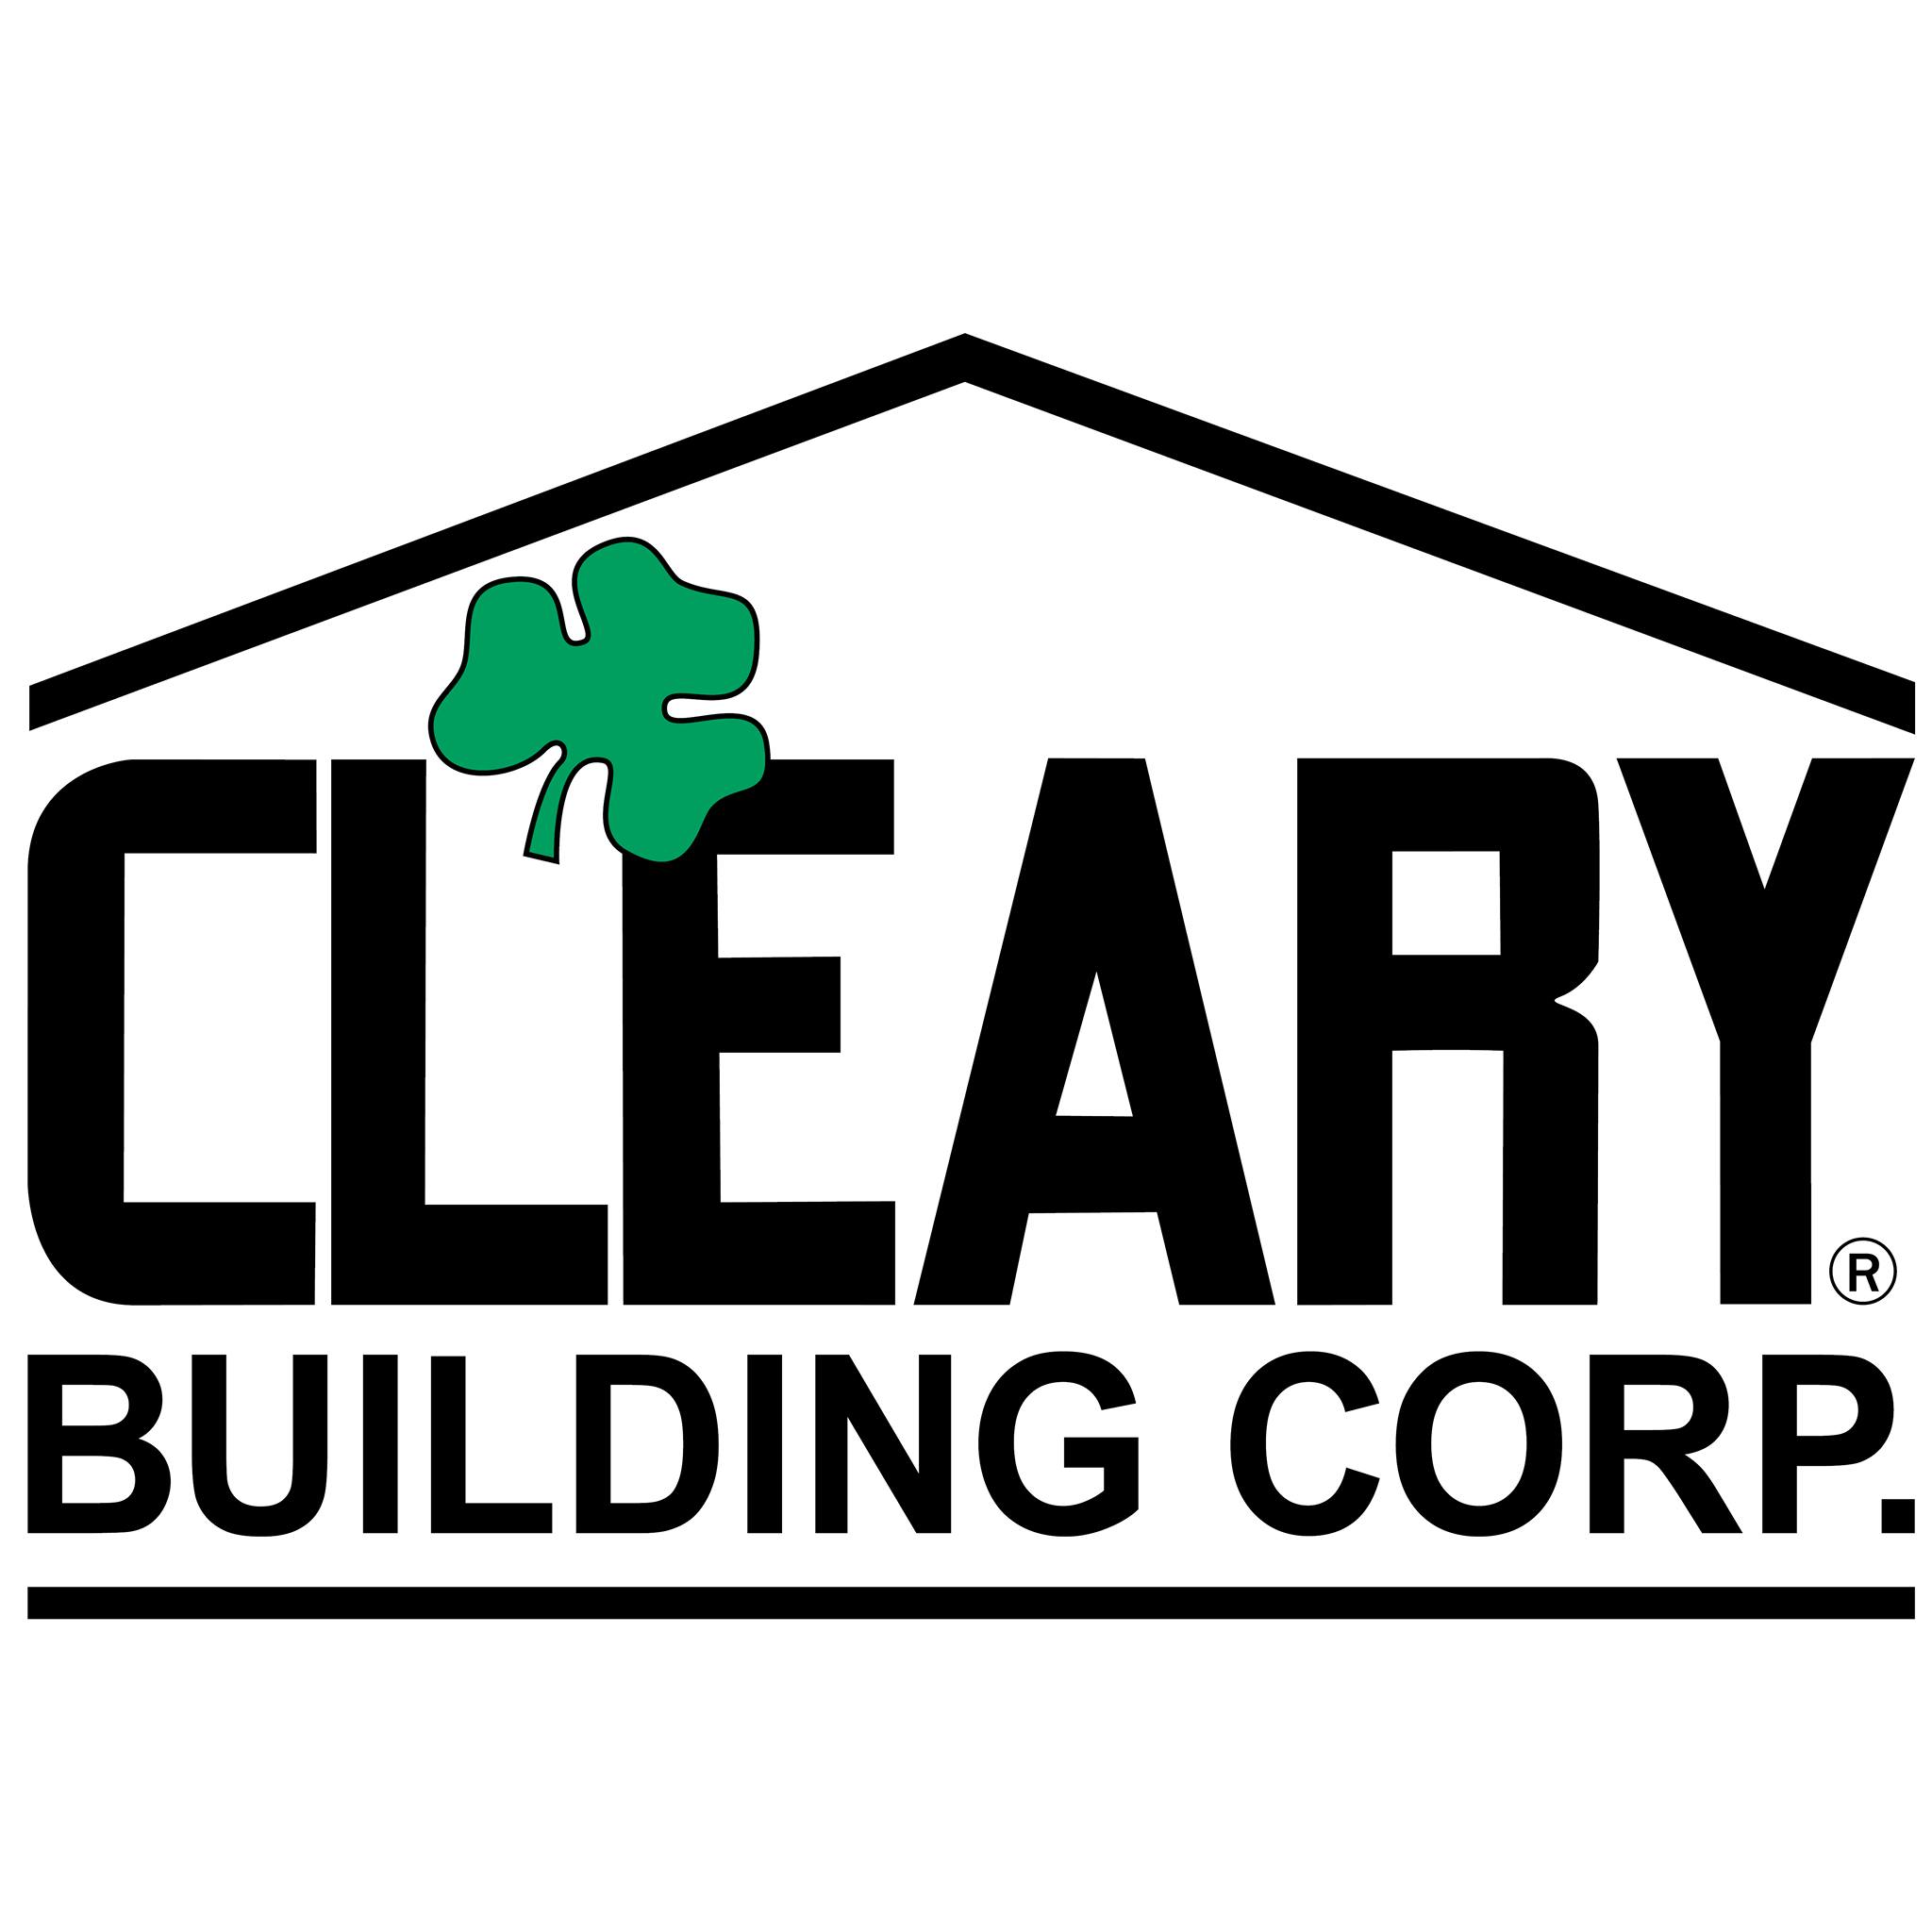 Company logo of Cleary Building Corp.